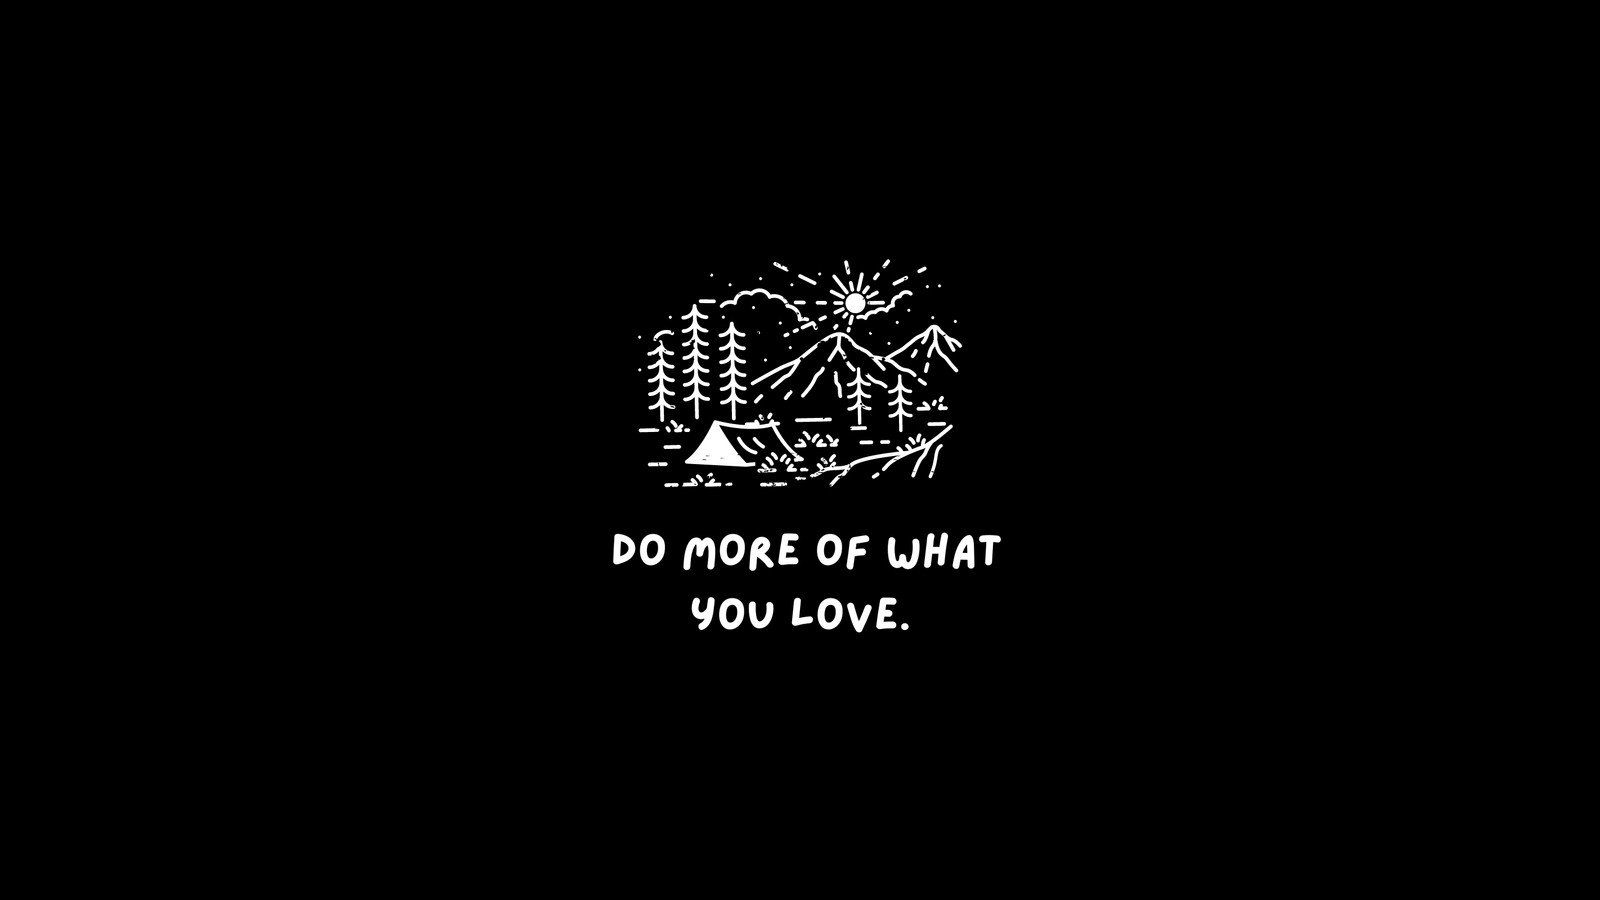 Do more of what you love - Motivational